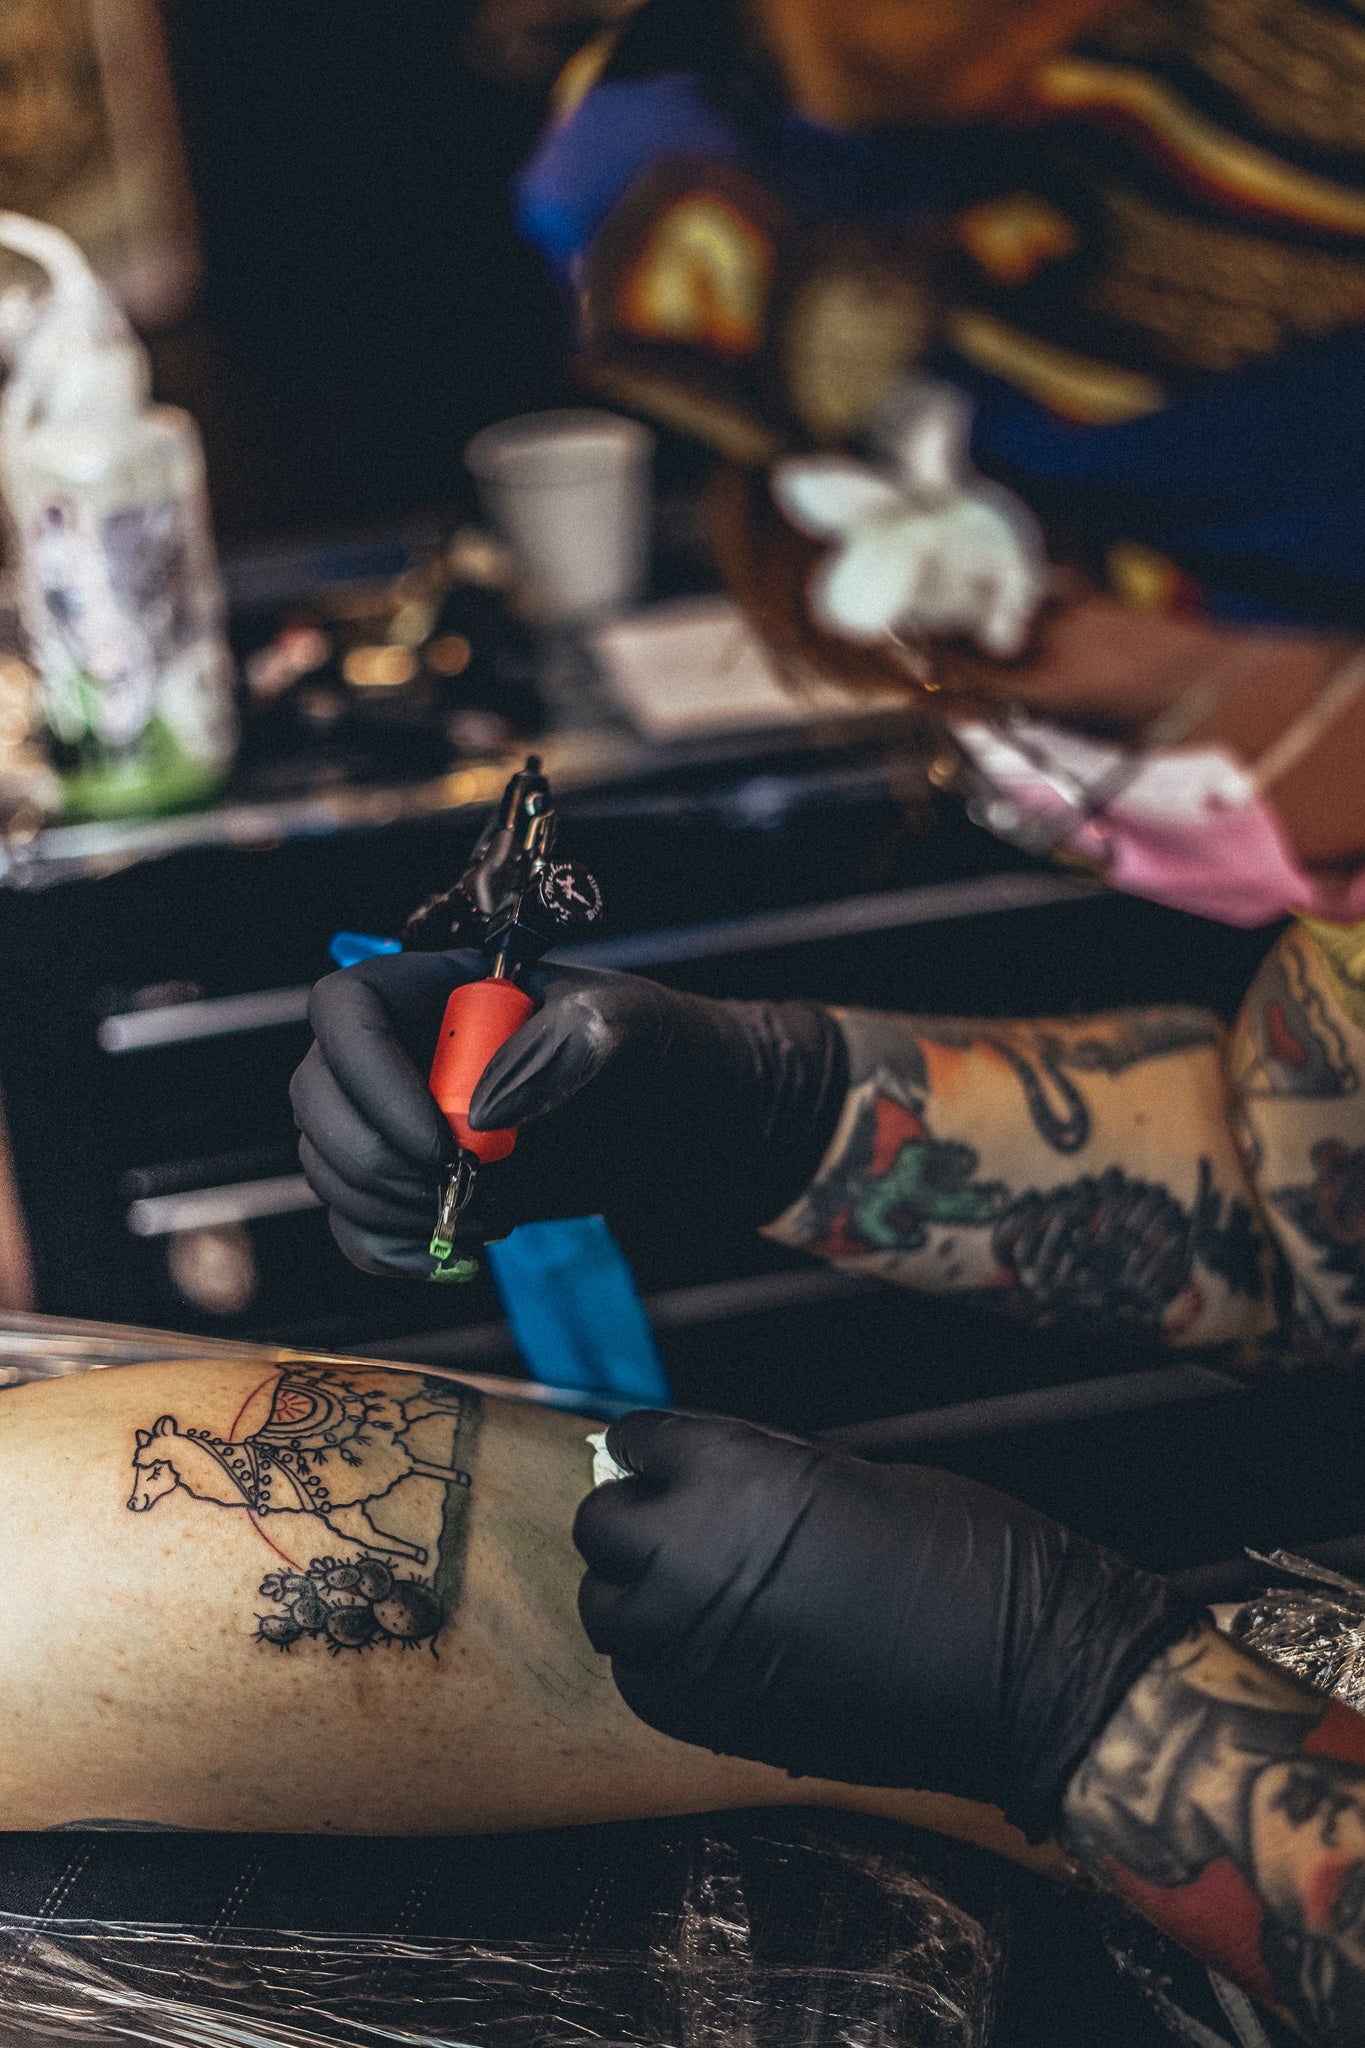 Tattoo healing: Here’s what to expect after getting inked